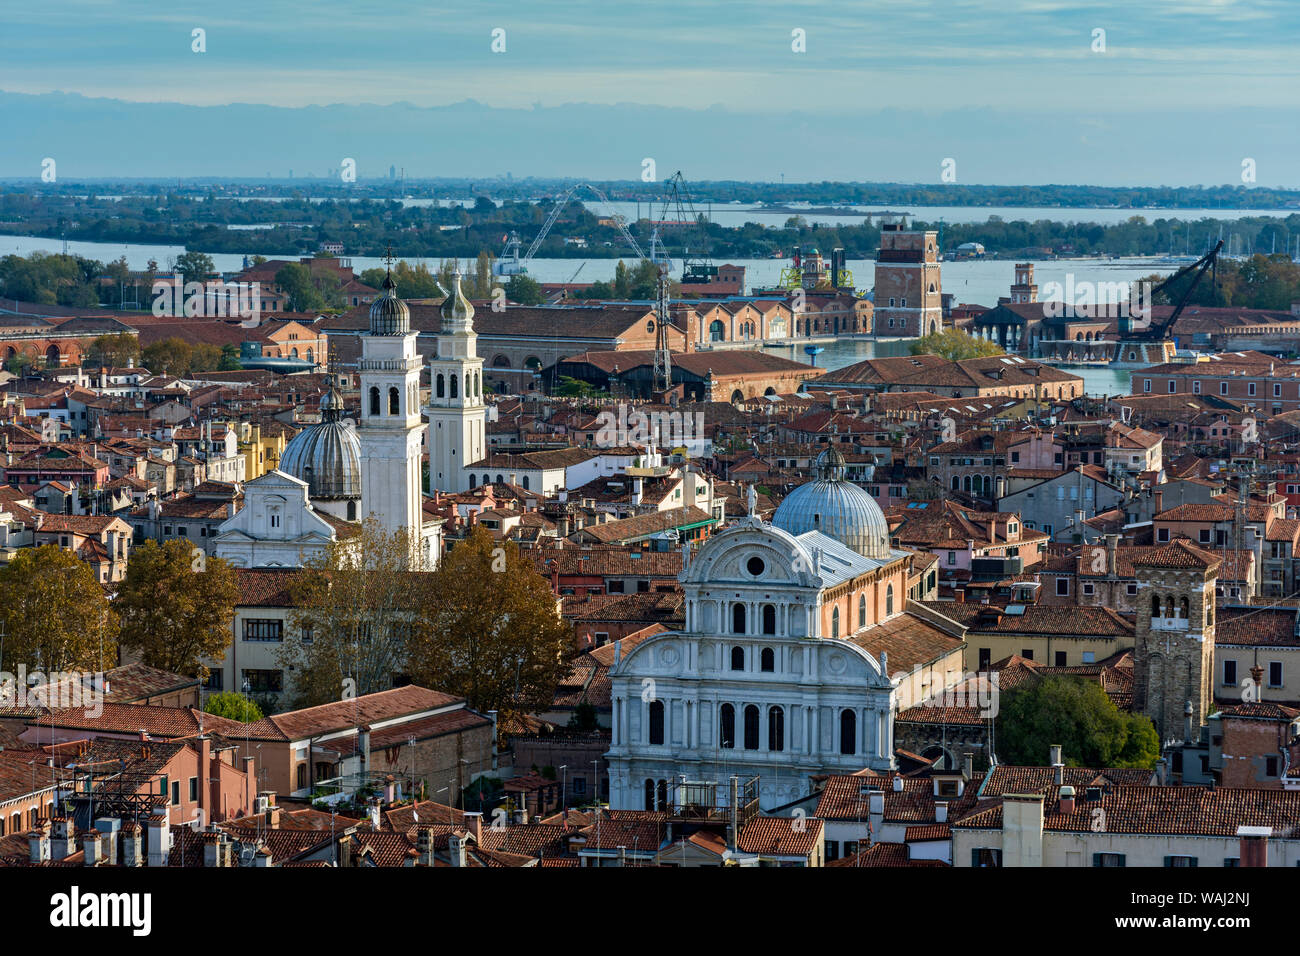 View of Venice over the Chiesa di San Zaccaria, from the Campanile di San Marco (bell tower), Saint Mark's Square, Venice, Italy Stock Photo